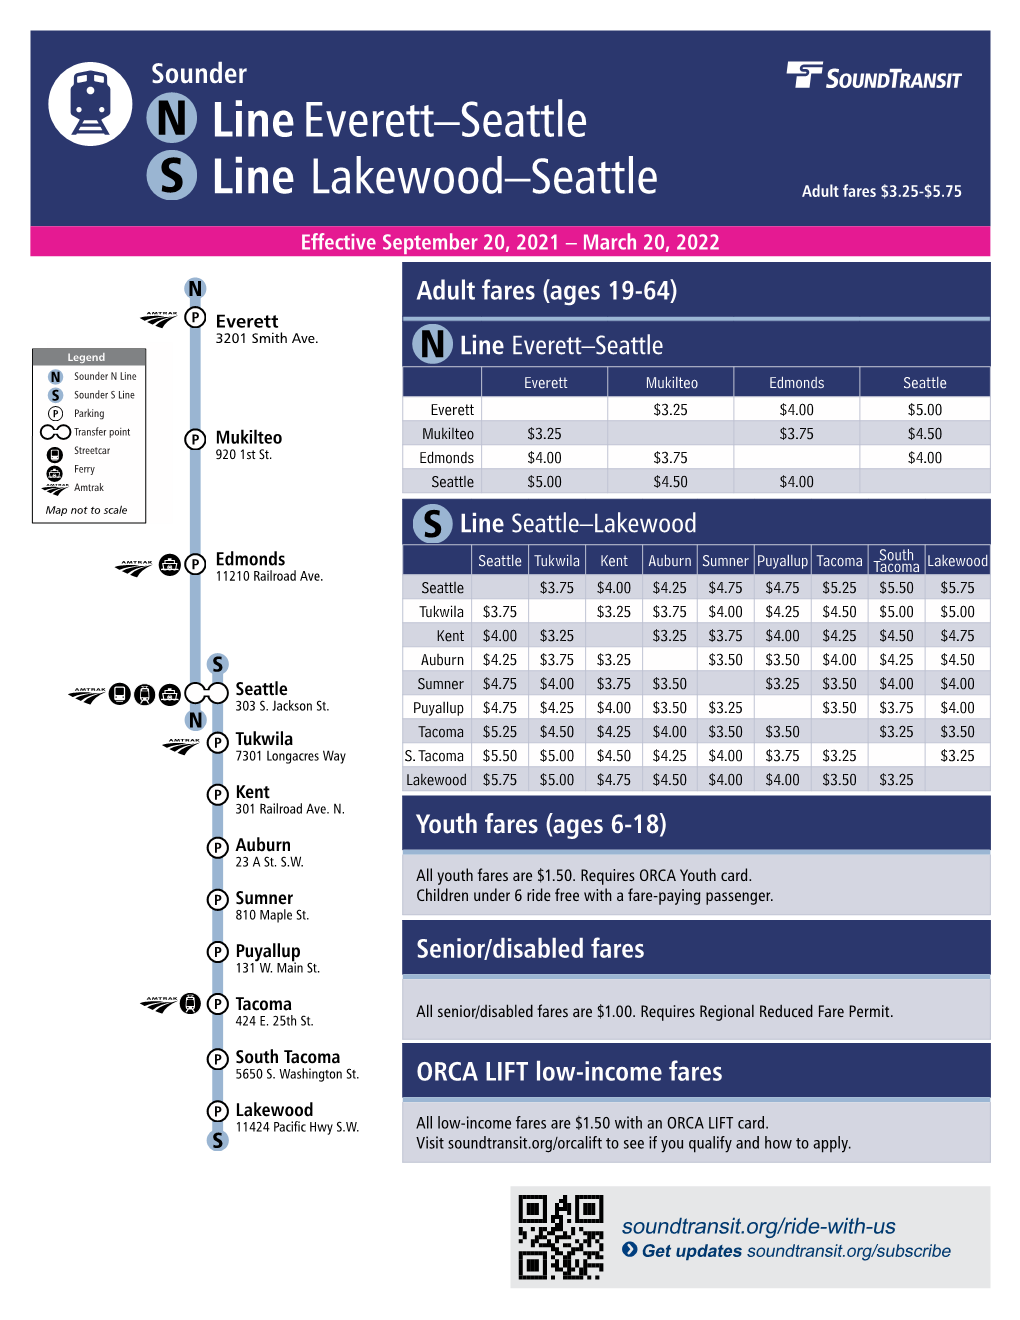 And Sounder South S Line (Lakewood/Tacoma – Seattle)